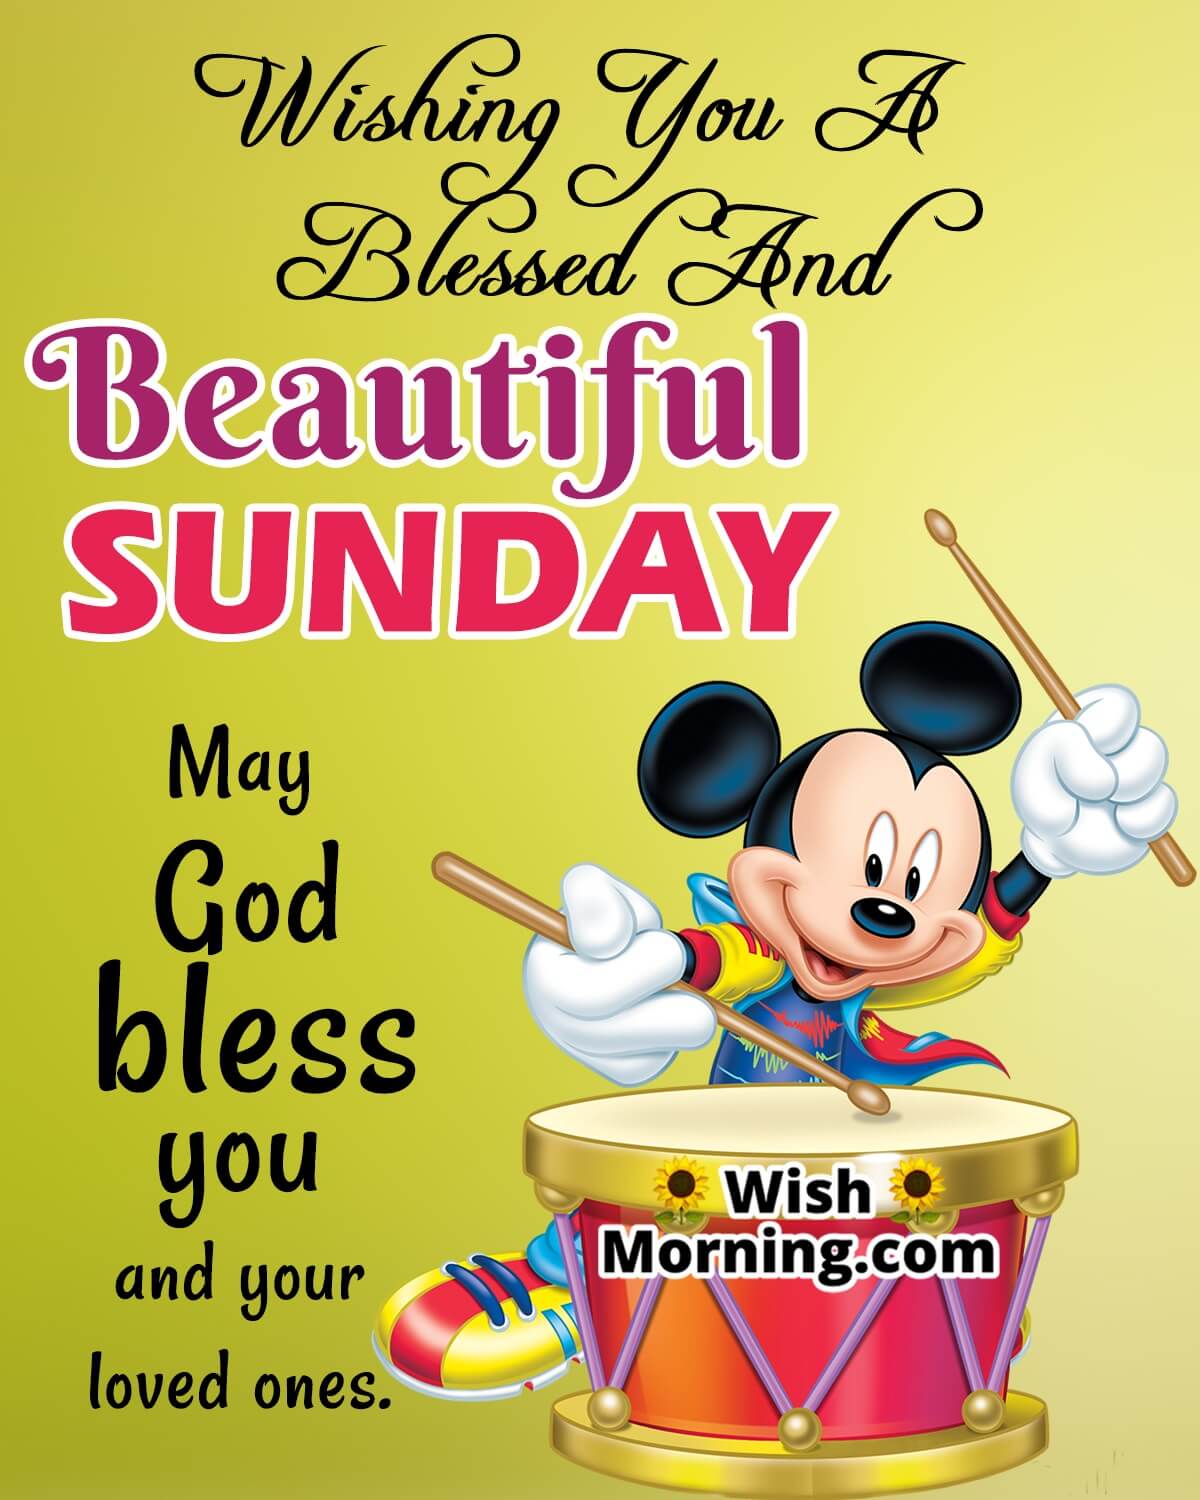 Wishing You A Blessed And Beautiful Sunday